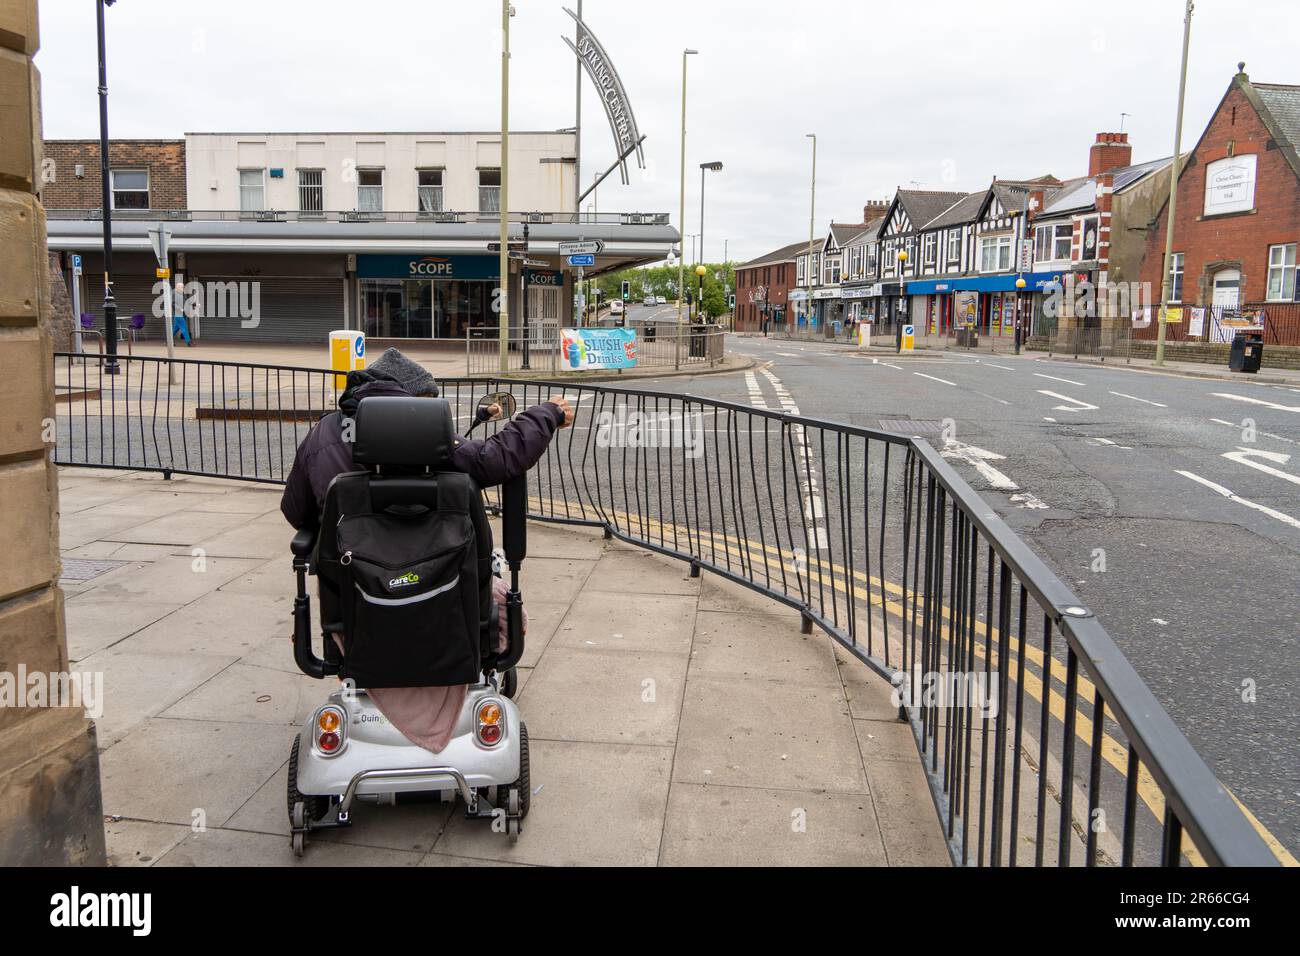 Jarrow, South Tyneside, UK. June 7th 2023. Trial of Universal Basic Income announced with Jarrow being one of the two towns in England where 15 people will be given £1,600 a month with no strings attached, to see what impact the money has on their lives. -- A man on a mobility scooter heads towards the Viking Shopping Centre in the town. Credit: Hazel Plater/ Alamy Live News Stock Photo